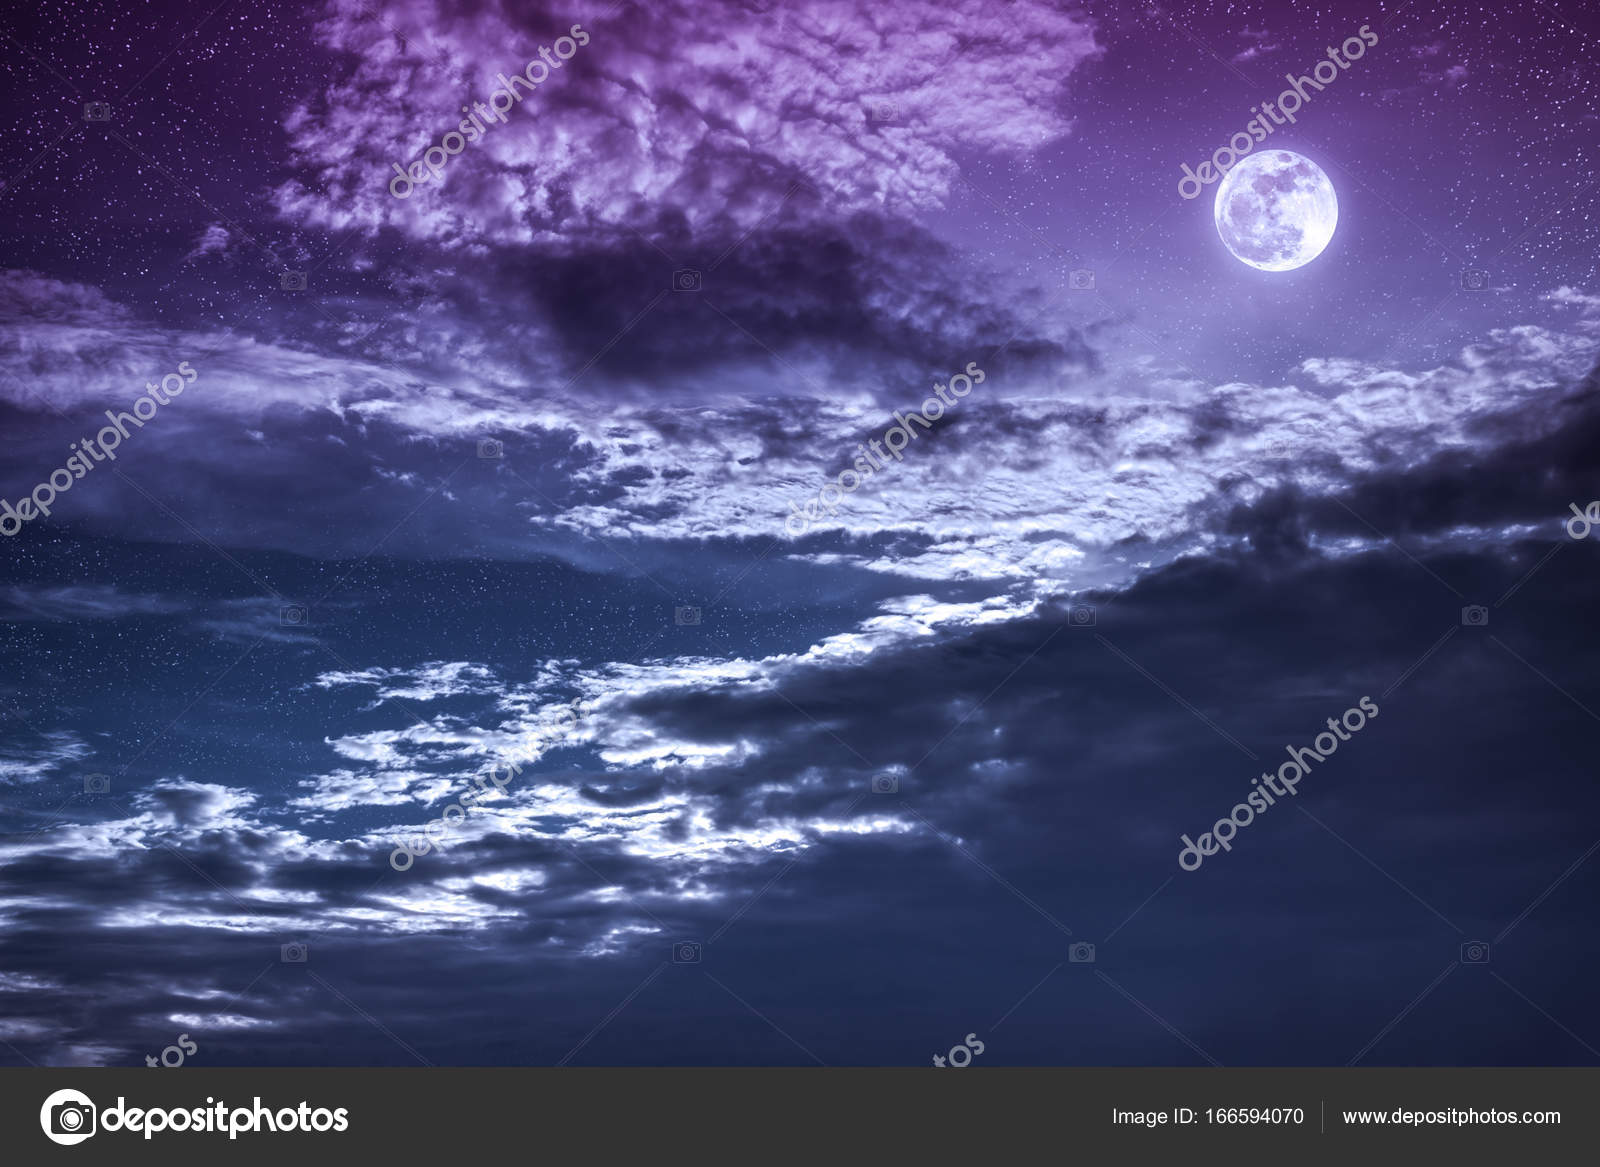 4K Moon Clouds Night City View Wallpaper, HD Nature 4K Wallpapers, Images  and Background - Wallpapers Den